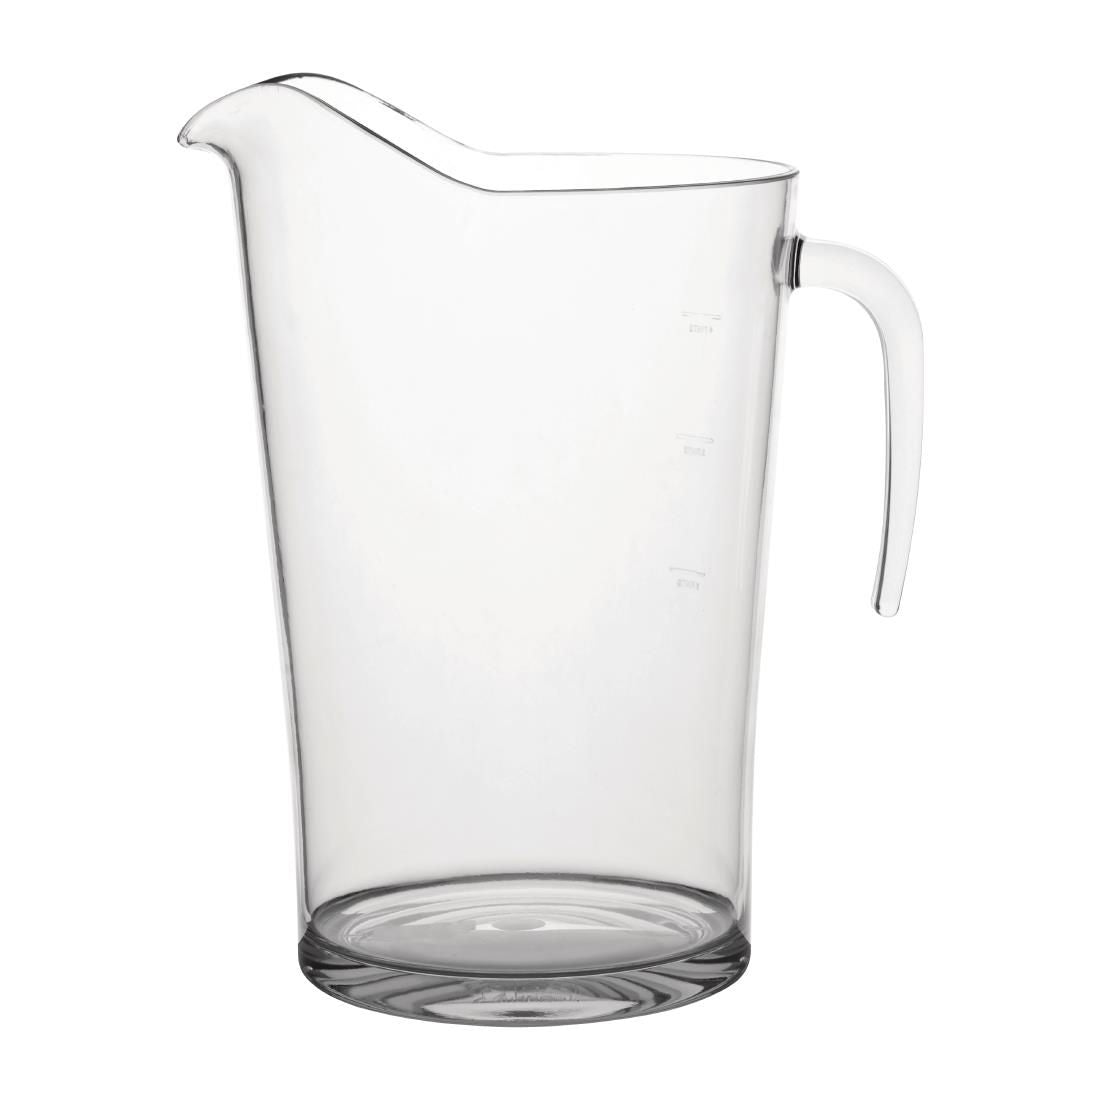 CY428 Utopia SAN Jugs 2.27Ltr CE Marked (Pack of 6) JD Catering Equipment Solutions Ltd